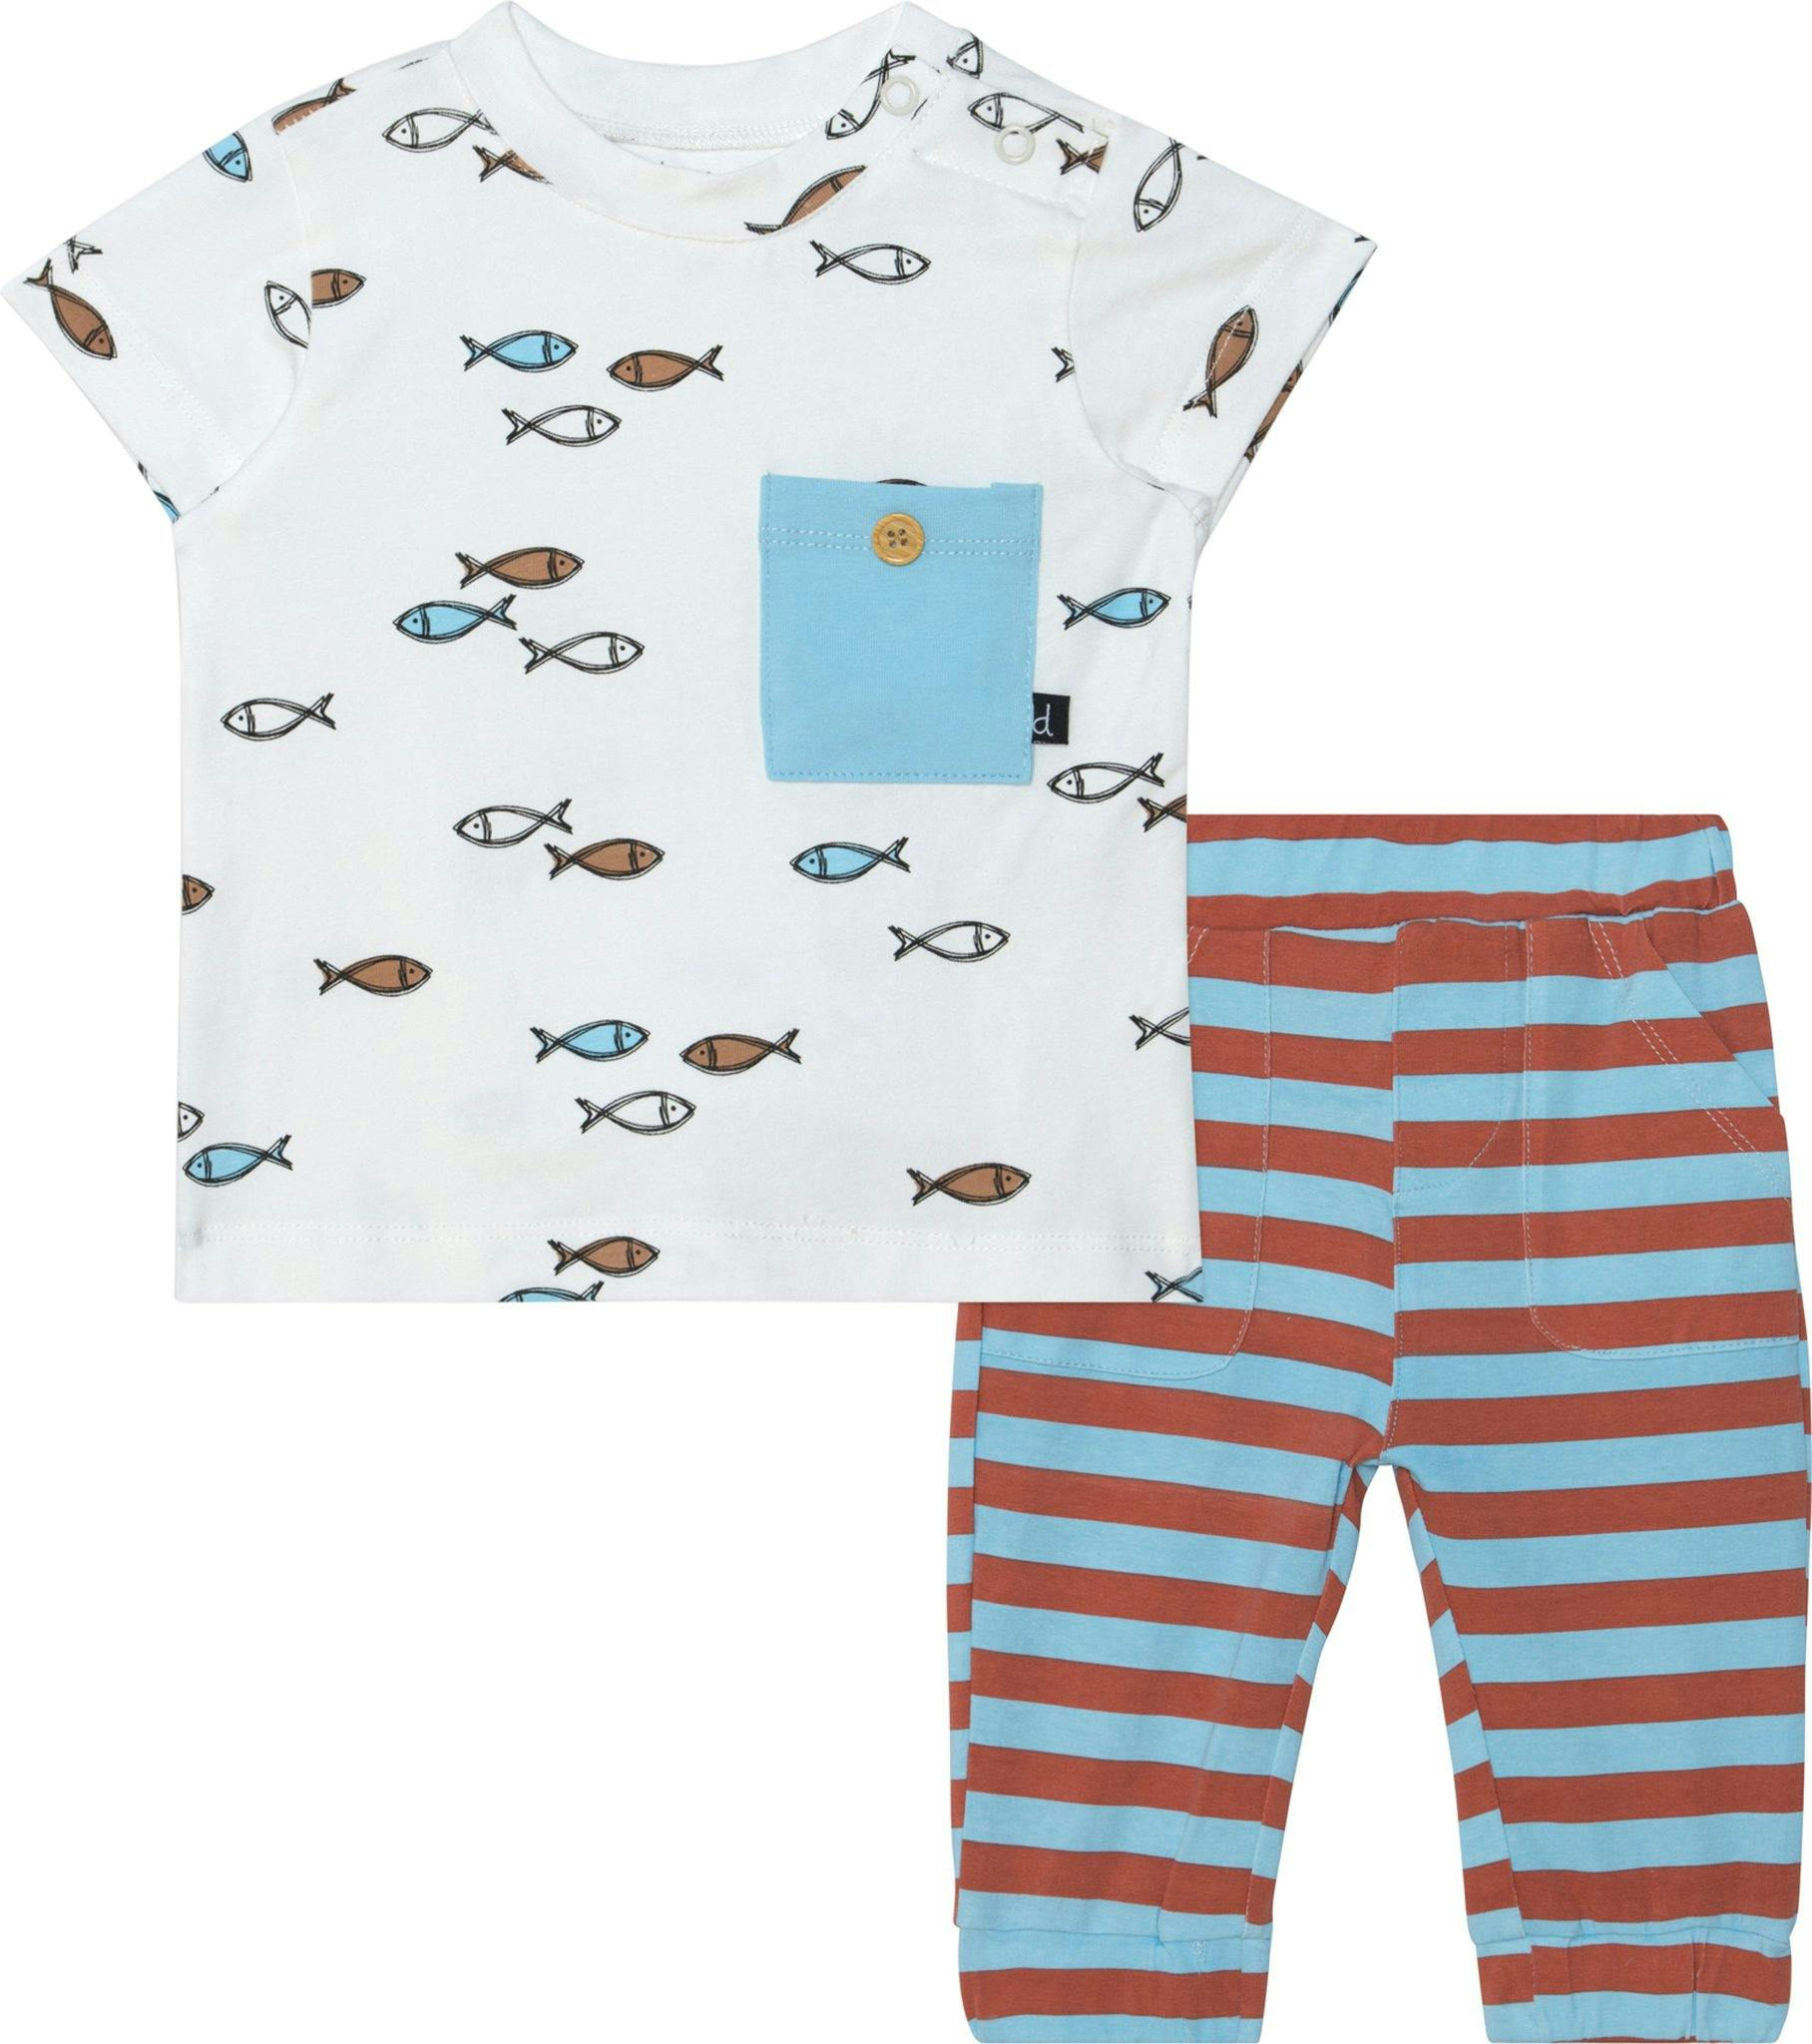 Product image for Organic Cotton Top and Pant Set - Baby Boy